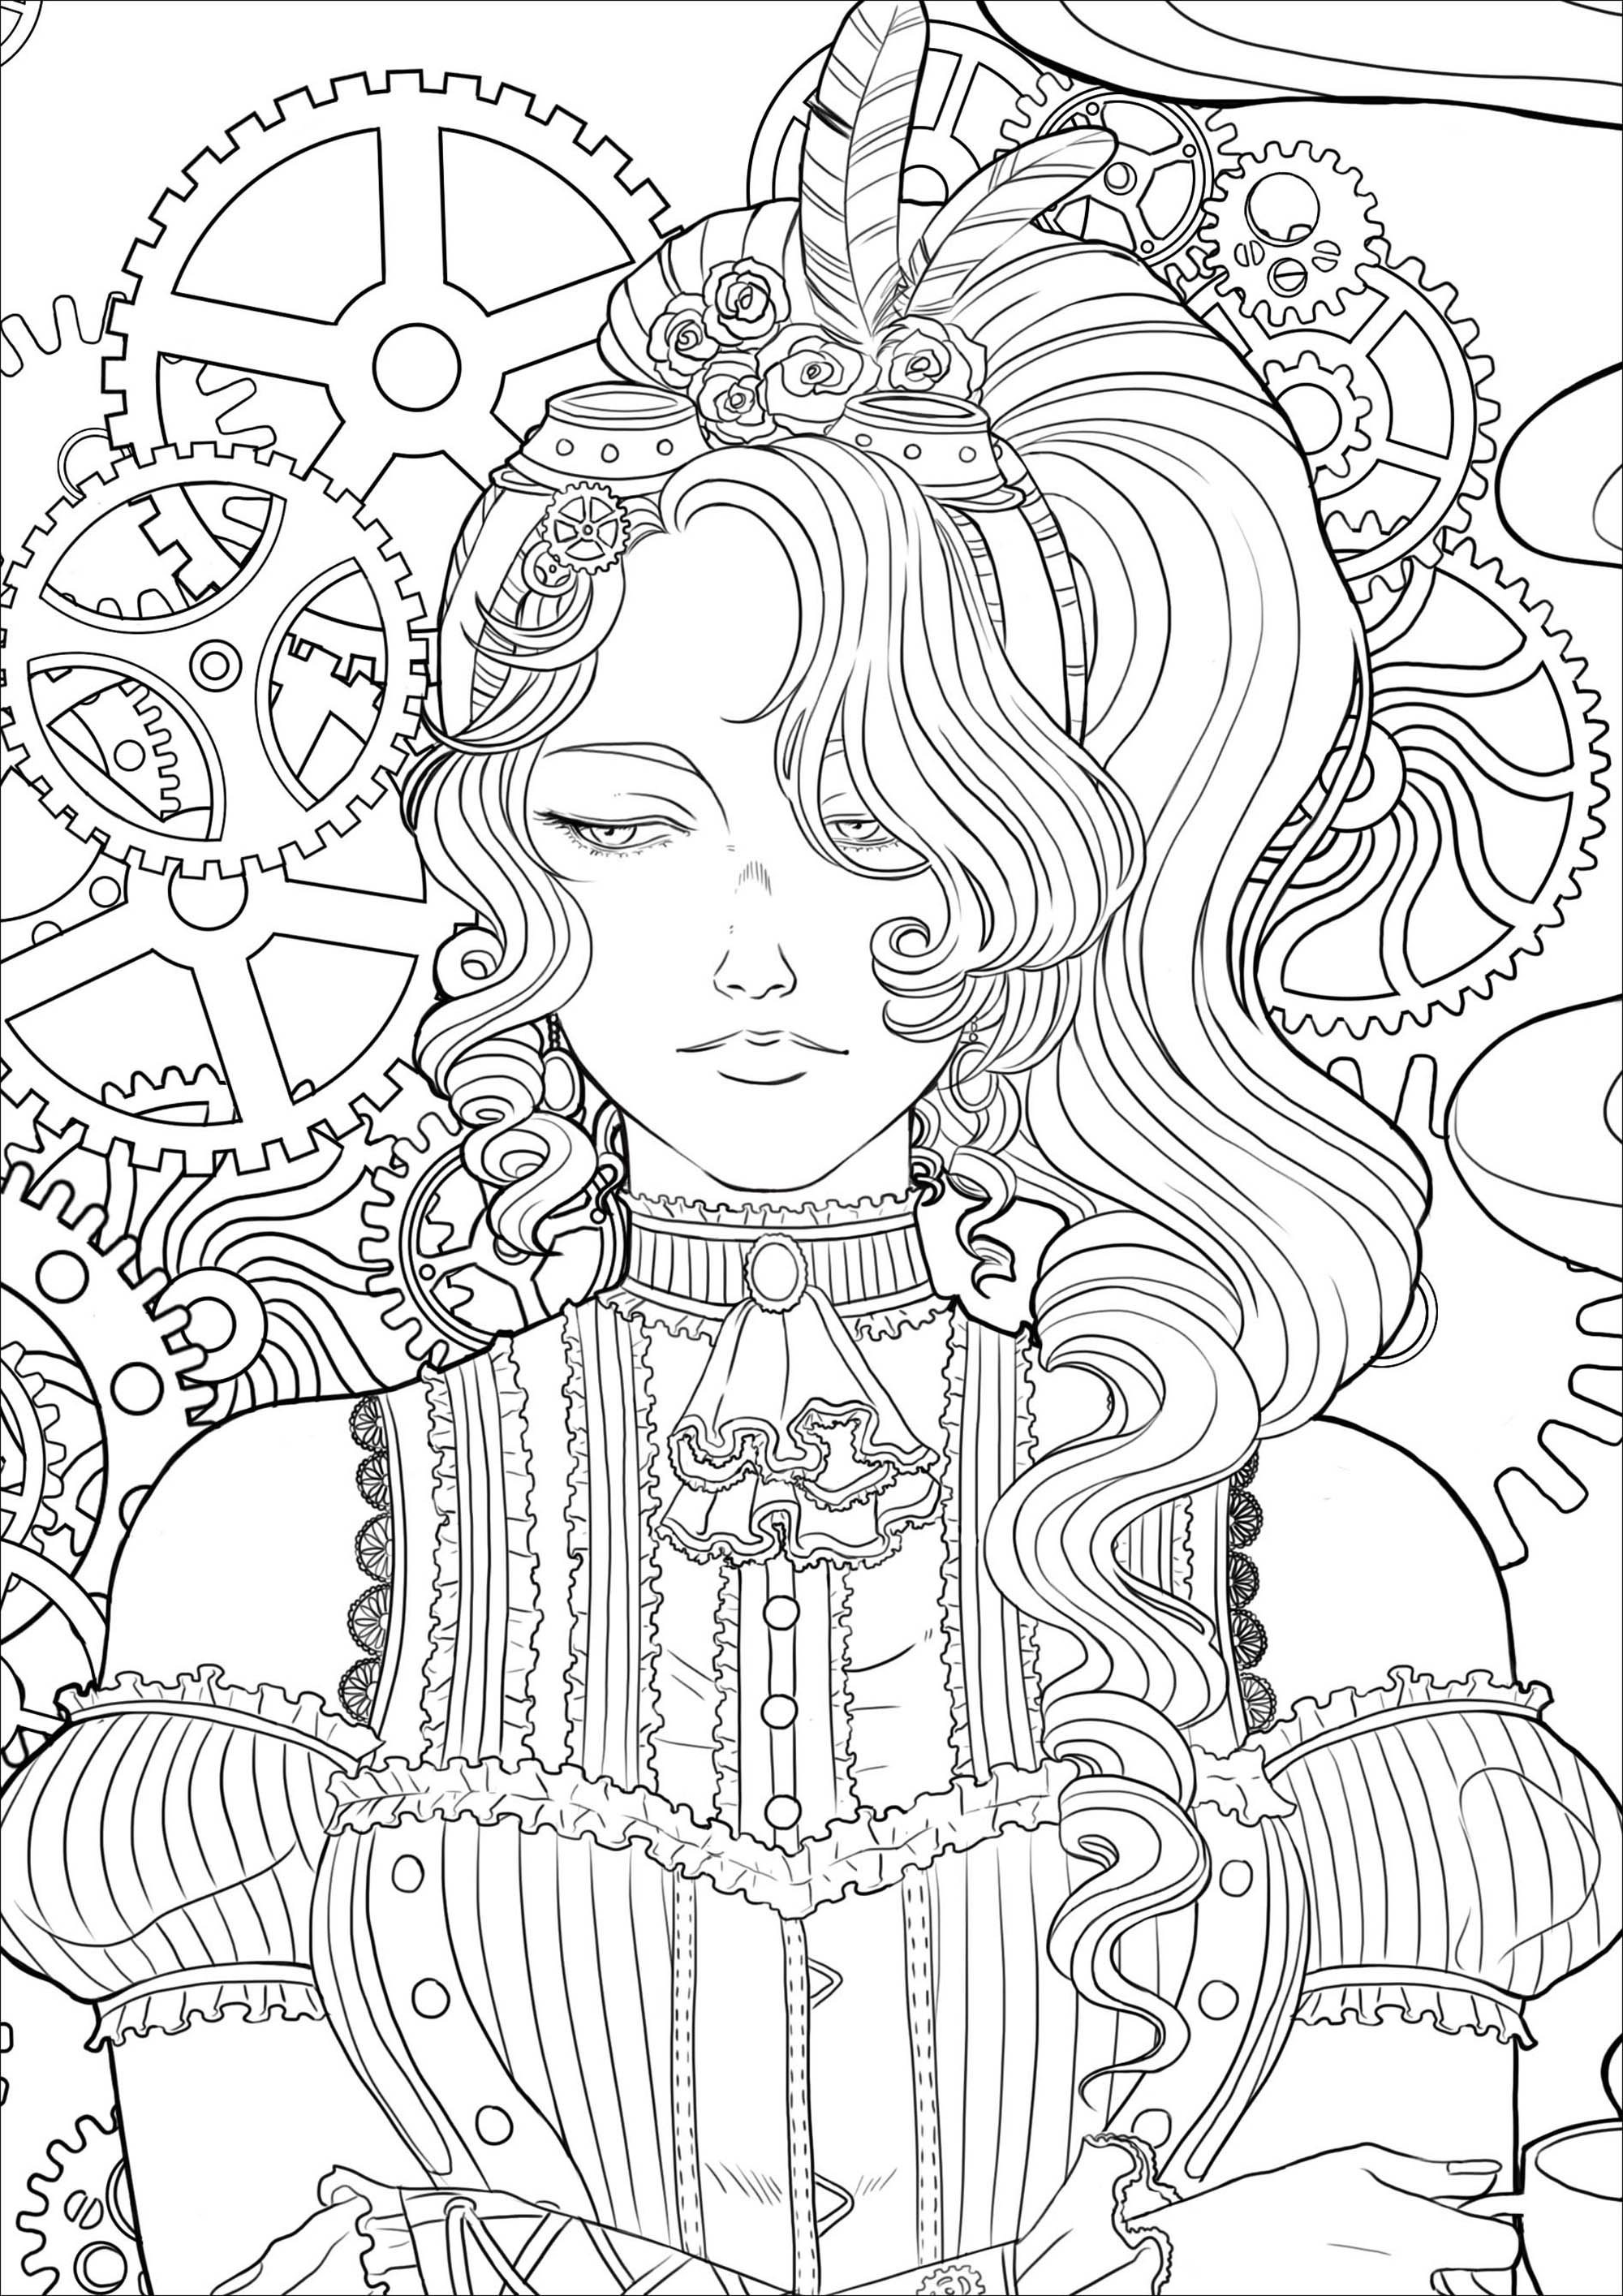 Retro Girl Coloring Page For Adults Printable Coloring Page In | Sexiz Pix